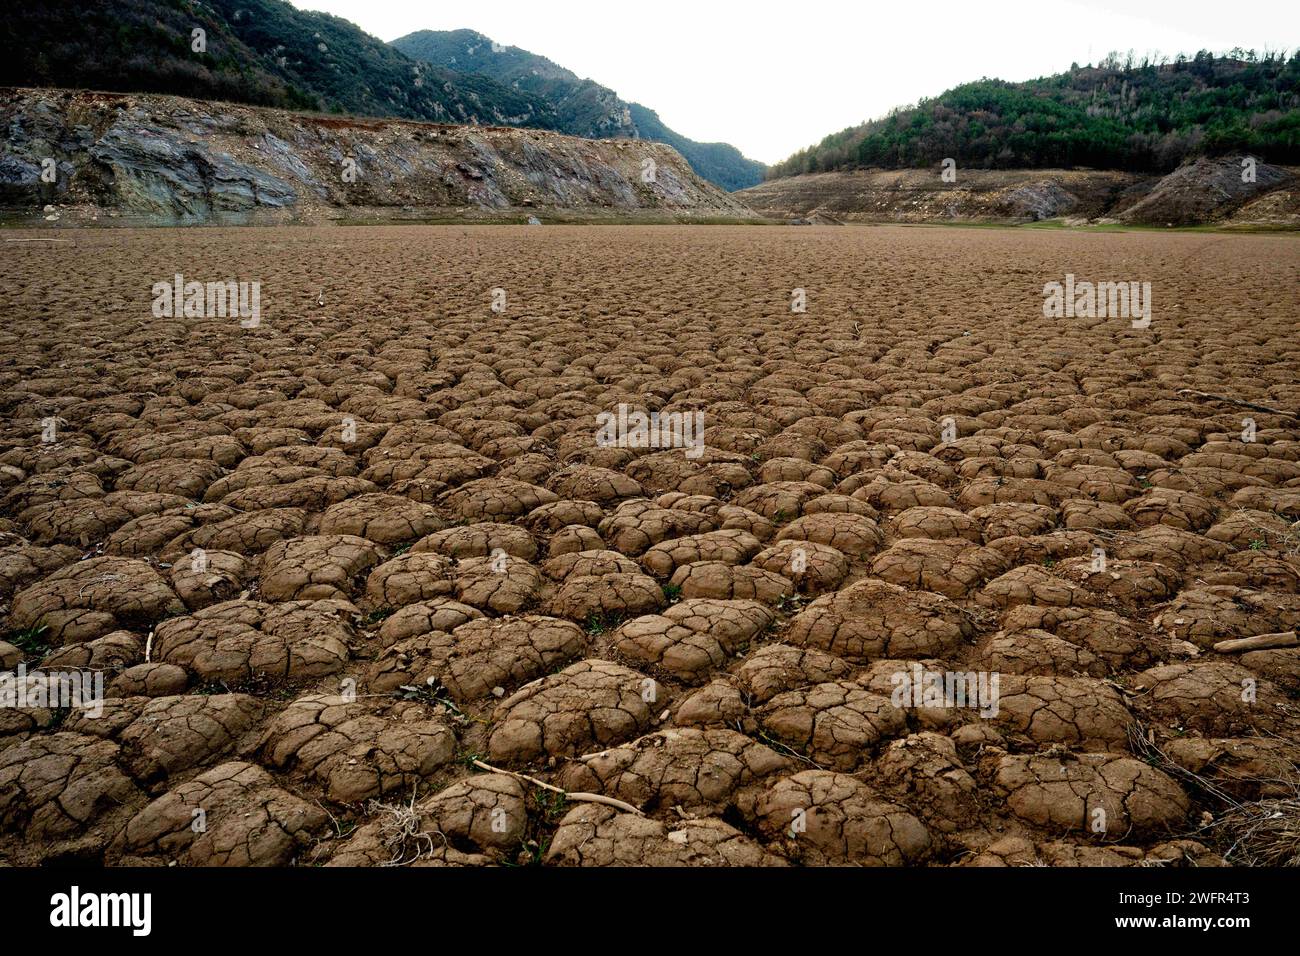 february, 01 2024 Cercs, Spain Drought Barcelona-Baells Reservoir Drought, Llobregat river Photo Eric Renom/LaPresse The Baells reservoir, which is nourished by the Llobregat River, is under minimum levels the day Catalonia declares a state of emergency due to drought in the metropolitan area of Barcelona, limiting the use of water or showers in gyms. The Llobregat River, the river that feeds this reservoir, is the most industrialized river in Catalonia, as it supplies the entire industrial area around Barcelona and is therefore vital for the operation of the Catalan industry, from the car b Stock Photo